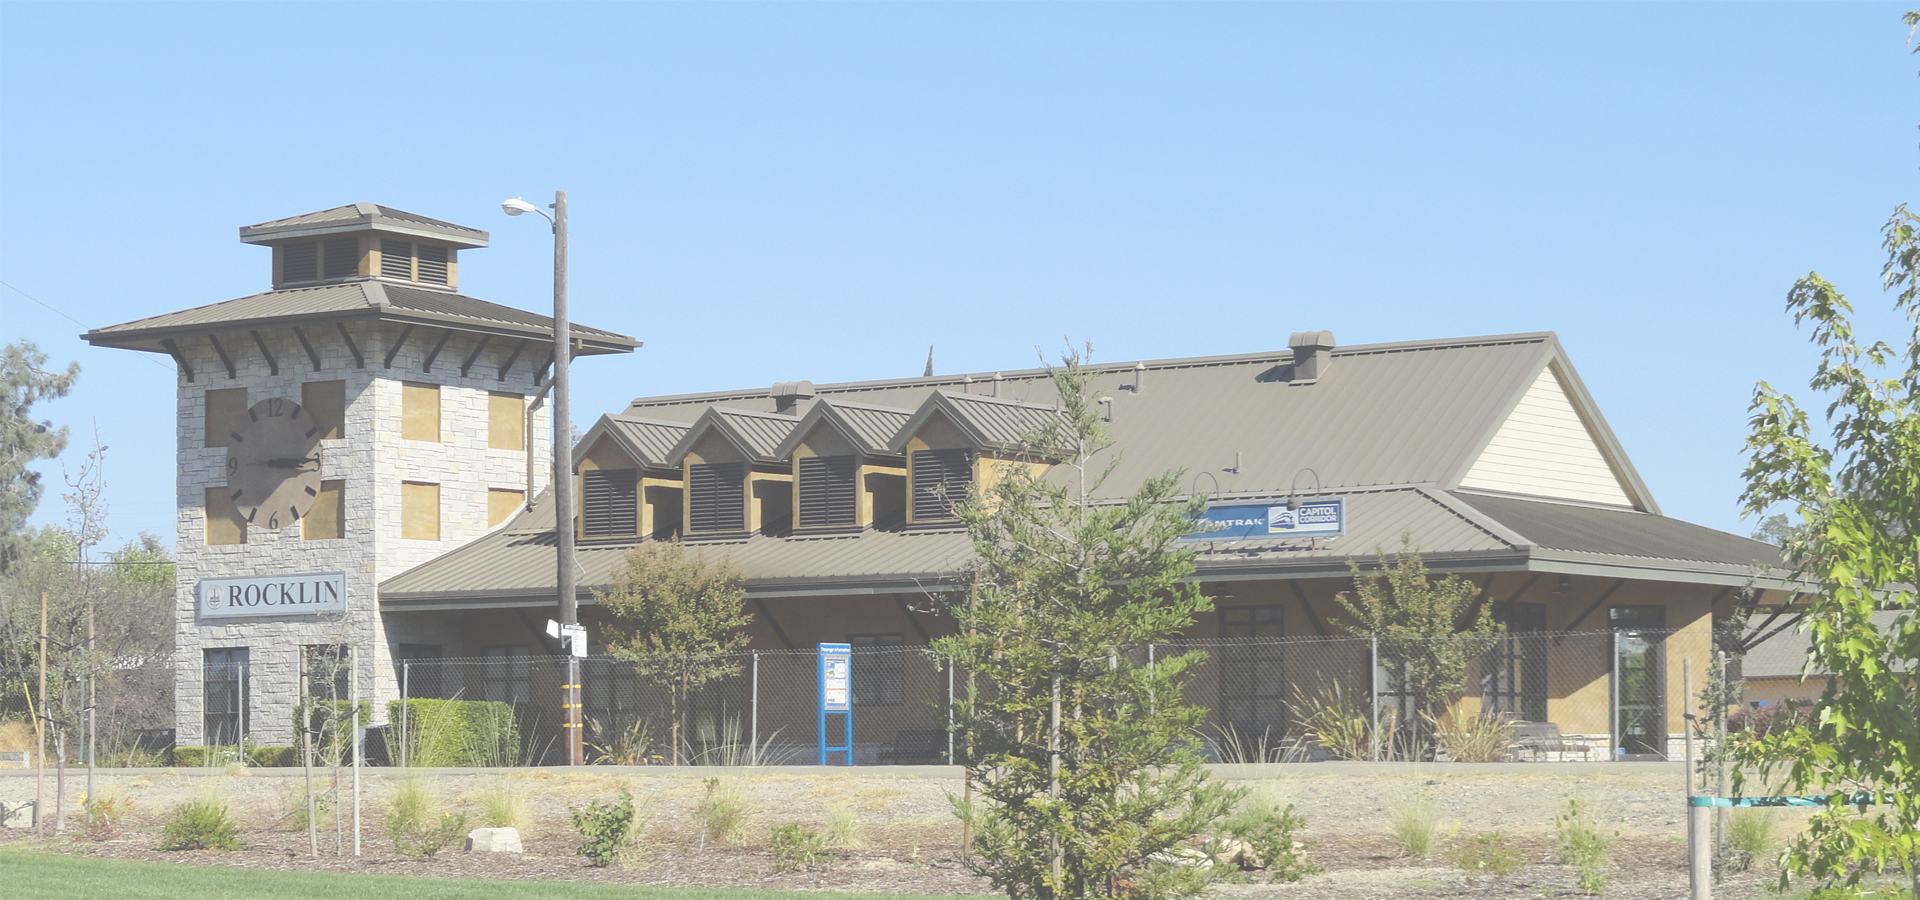 Amtrak station and Chamber of Commerce, Rocklin, California